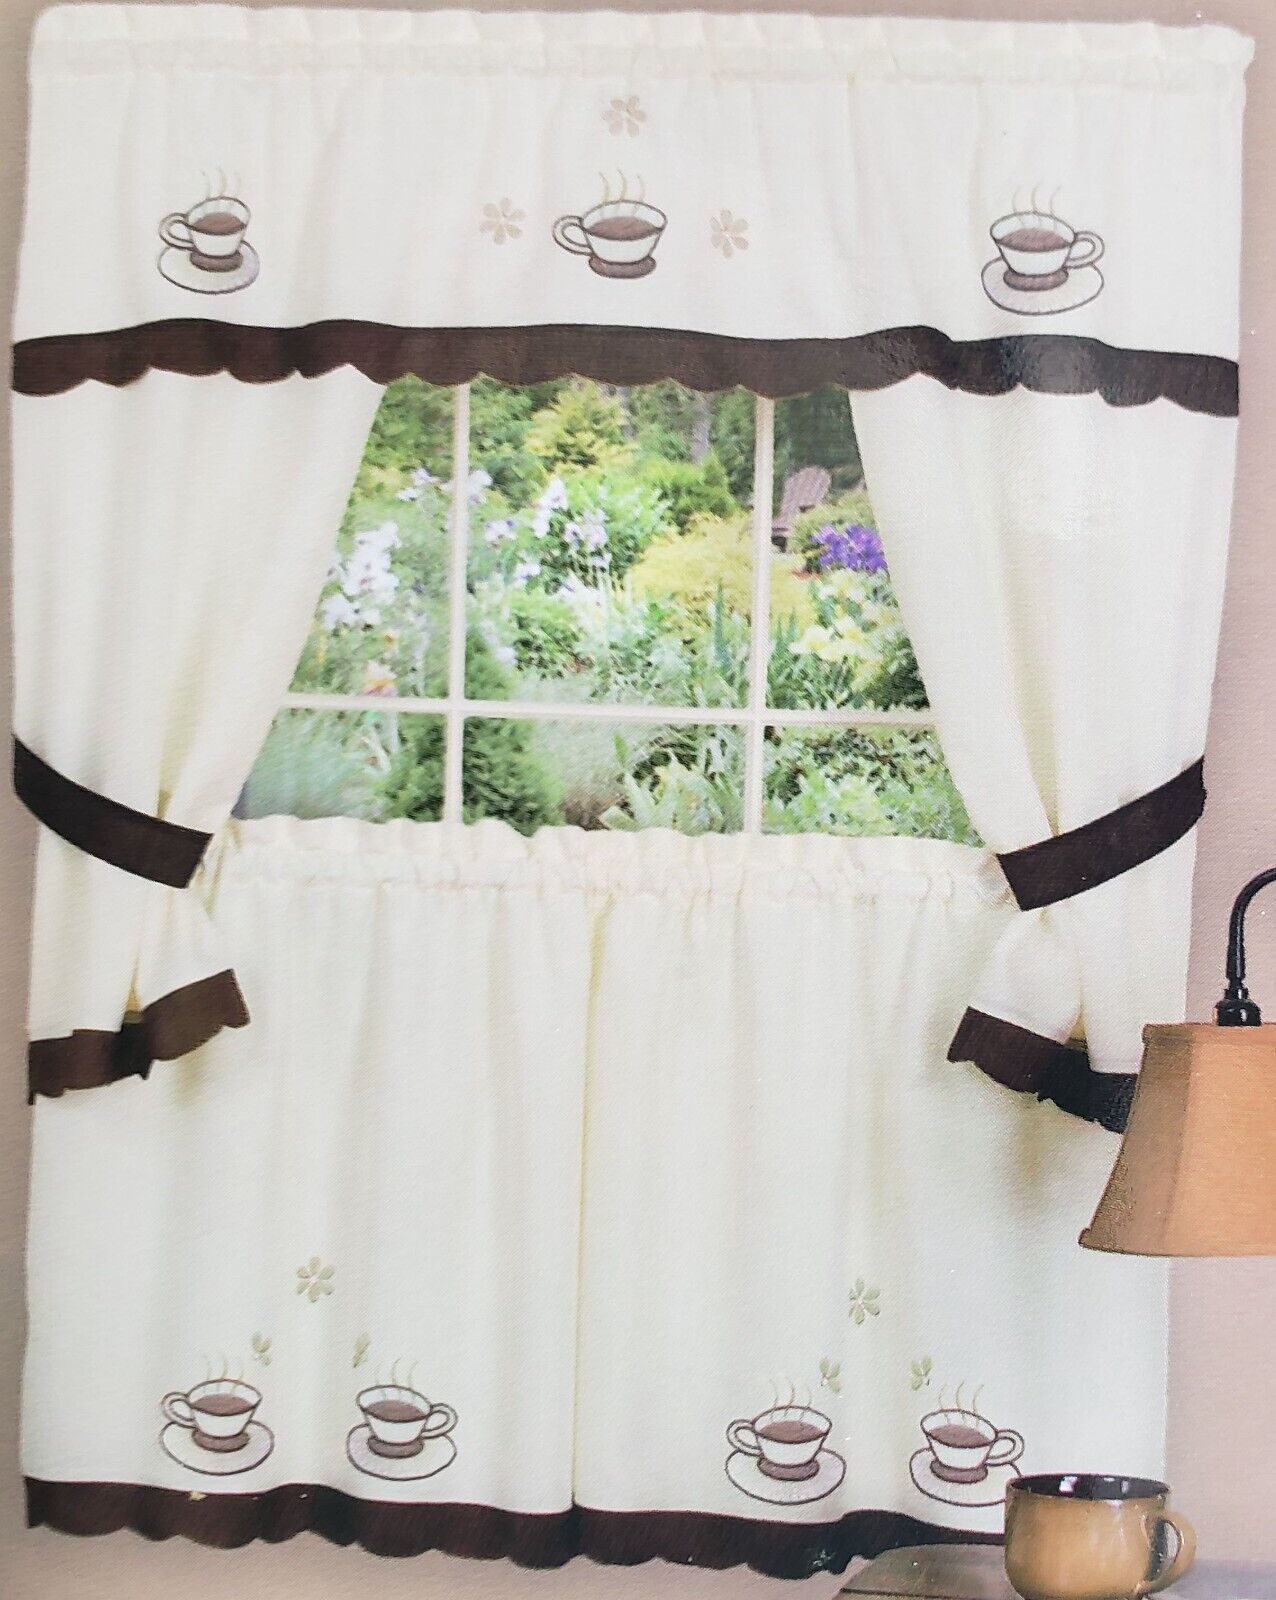 3pc Embellished Cottage Curtains Set: 2 Tiers & Swag,COFFEE CUP,CUPPA JOE,Achim - $22.76